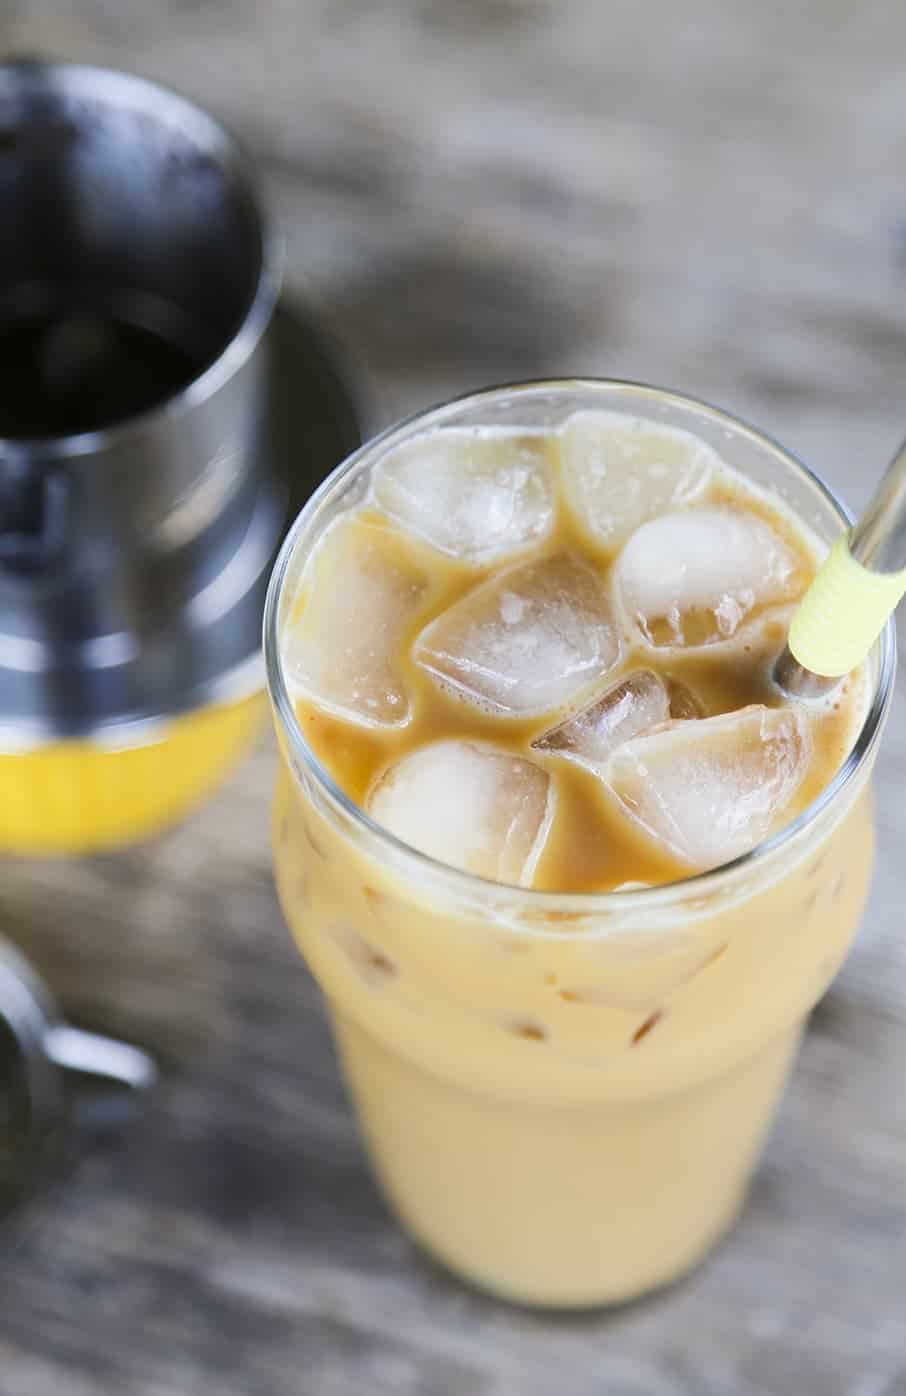 https://www.foodiewithfamily.com/wp-content/uploads/2016/06/Vietnamese-Iced-Coffee.jpg